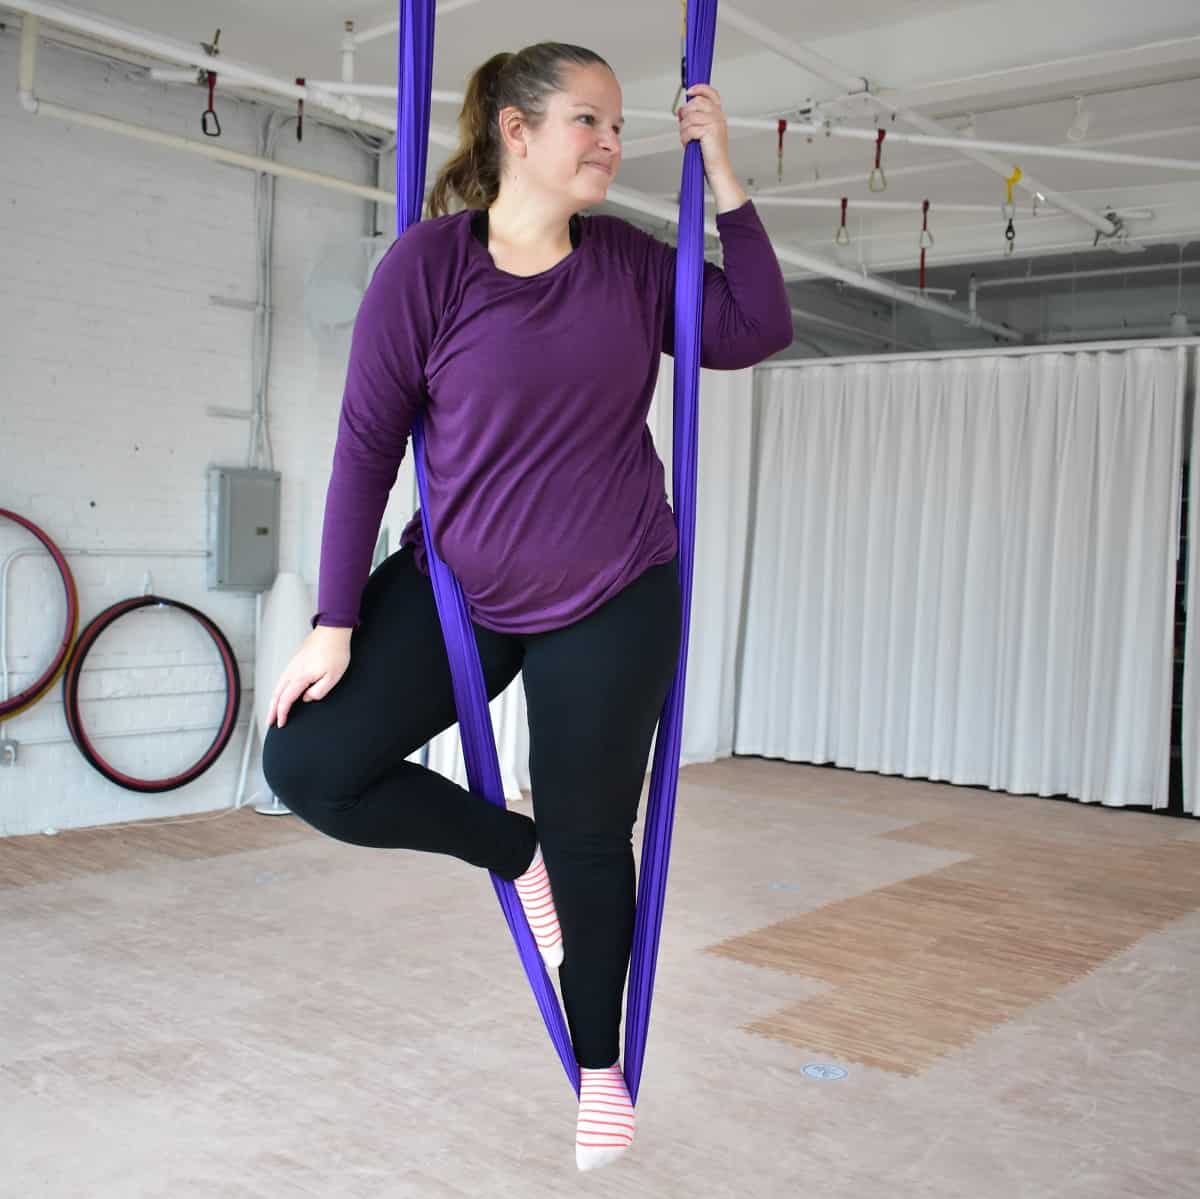 A woman doing aerial yoga.